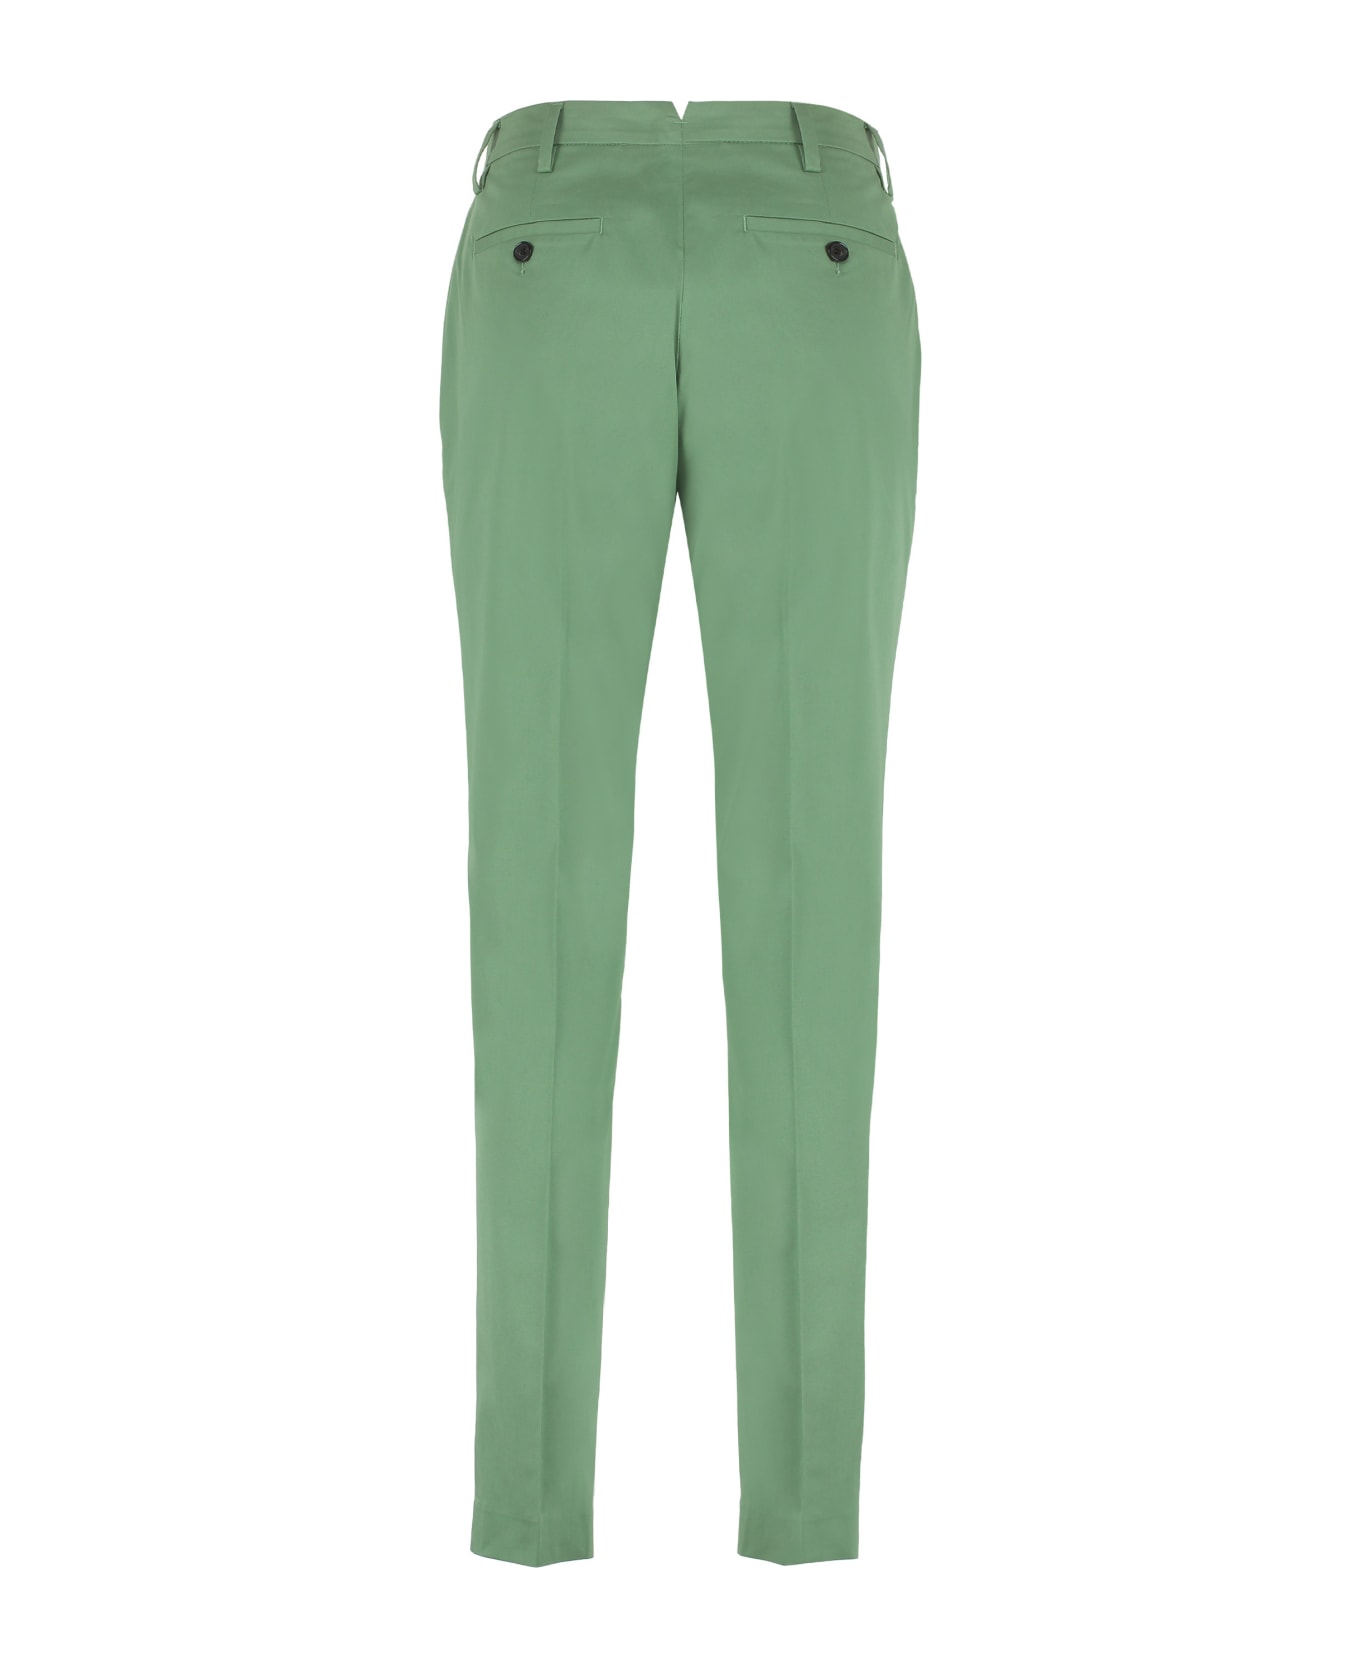 Department Five Stretch Cotton Dolce Trousers - green